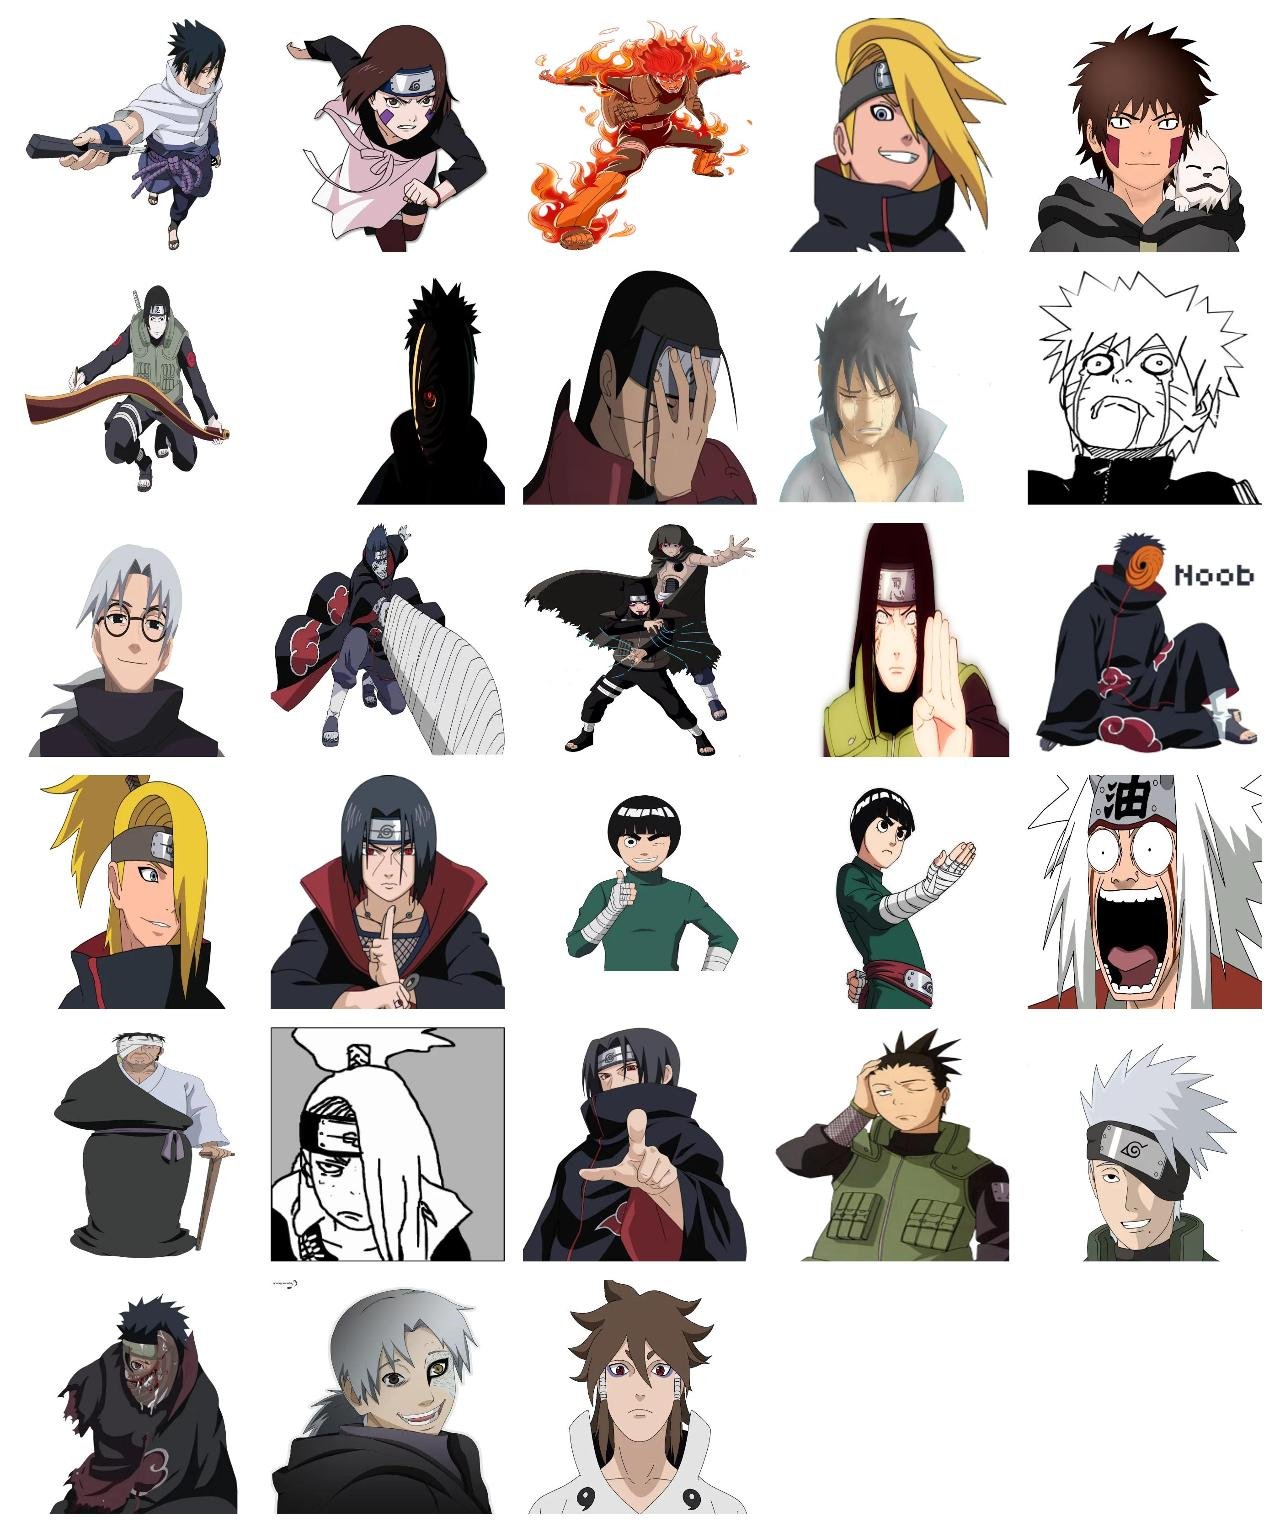 Naruto #6 Naruto sticker pack for Whatsapp, Telegram, Signal, and others chatting and message apps